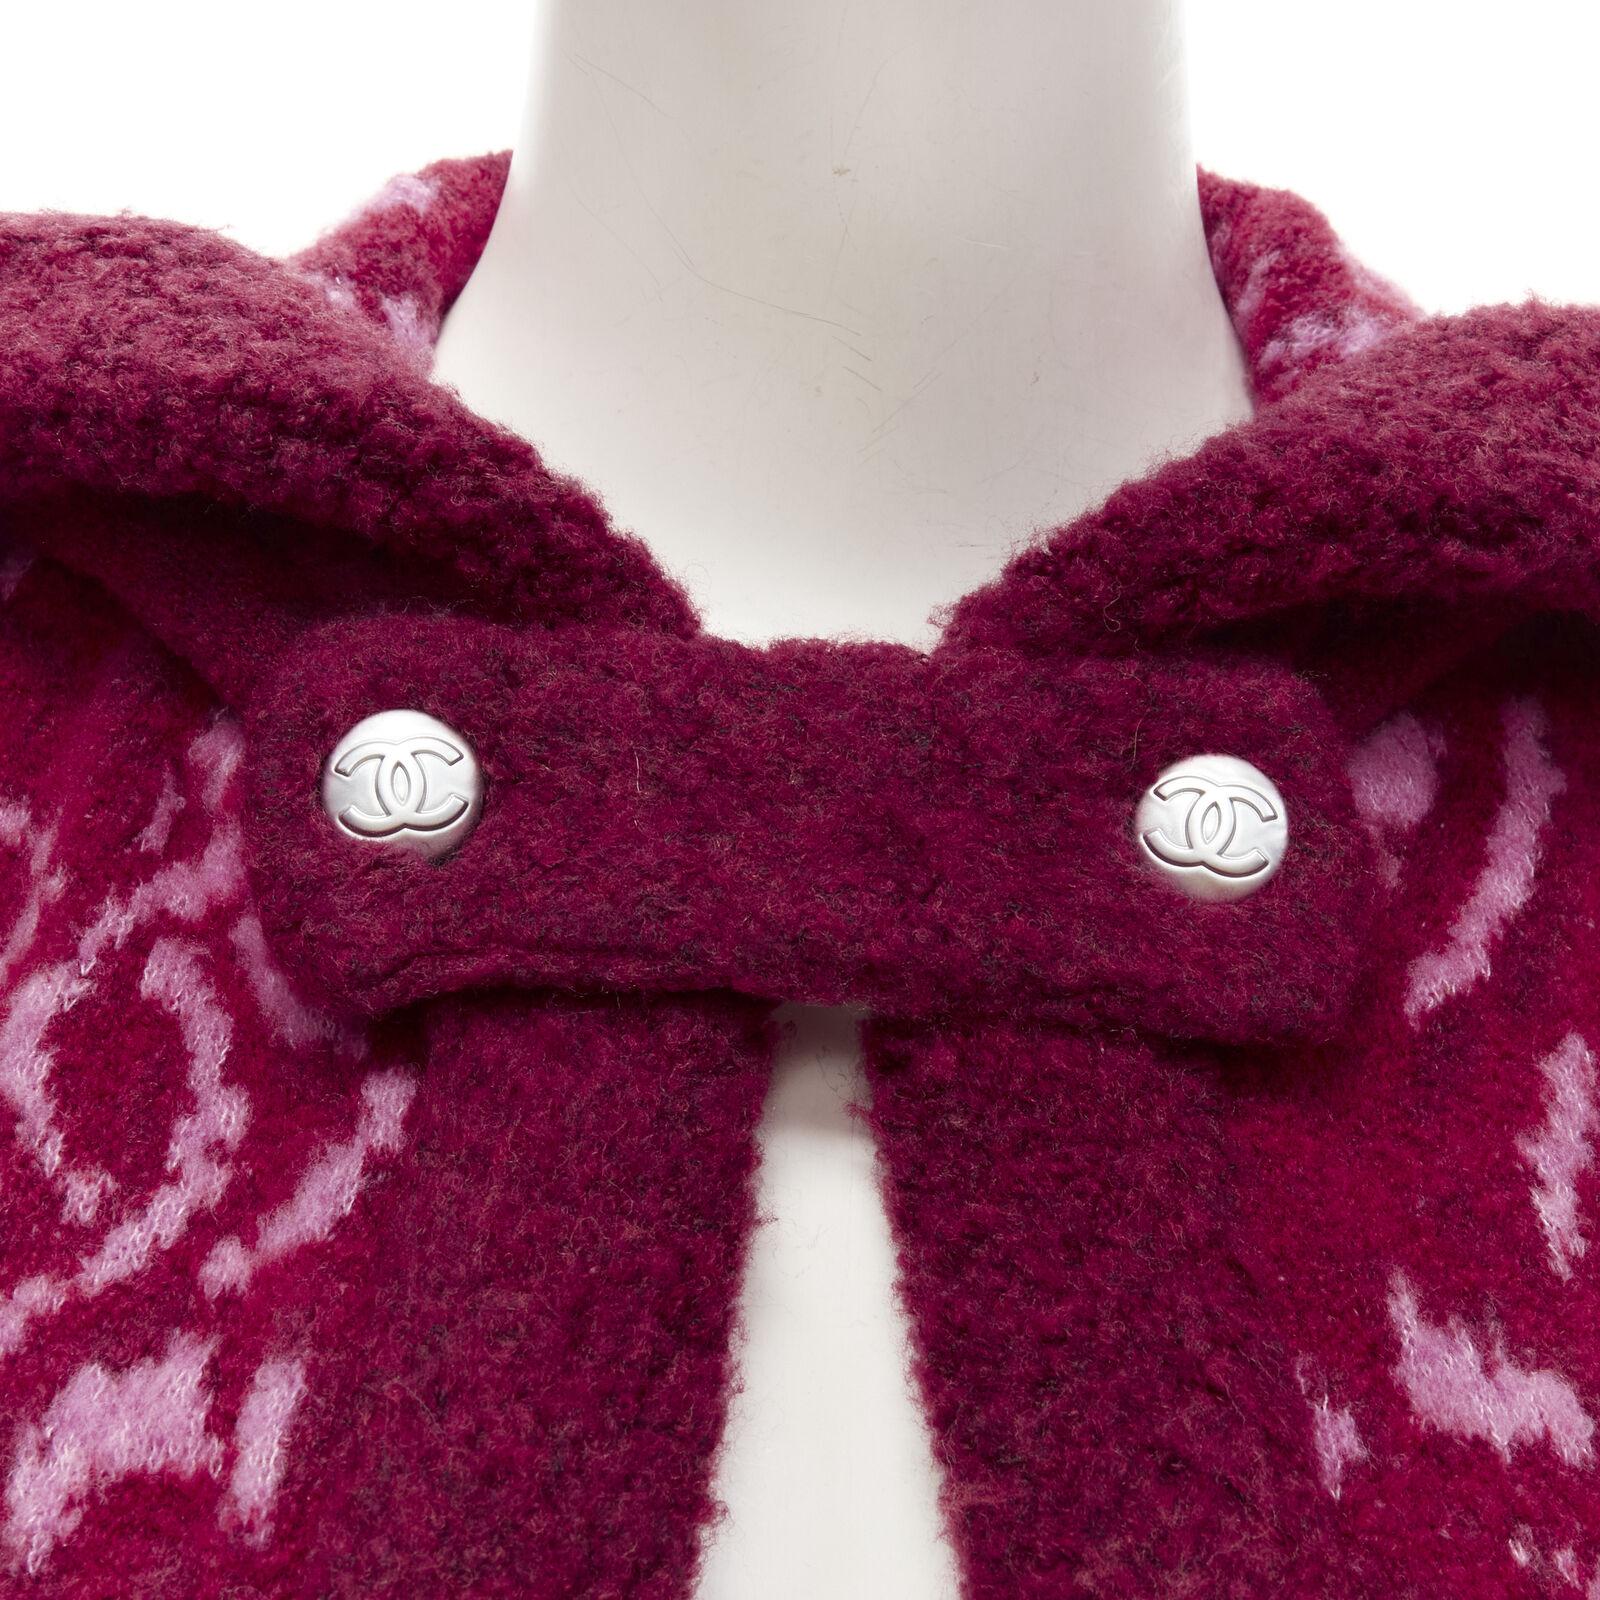 rare CHANEL red pink Camellia CC wool fluffy boucle trim cardigan jacket FR34 XS
Reference: AAWC/A00248
Brand: Chanel
Designer: Virginie Viard
Model: P70629 K10207
Material: Wool, Blend
Color: Red, Pink
Pattern: Floral
Closure: Button
Lining: